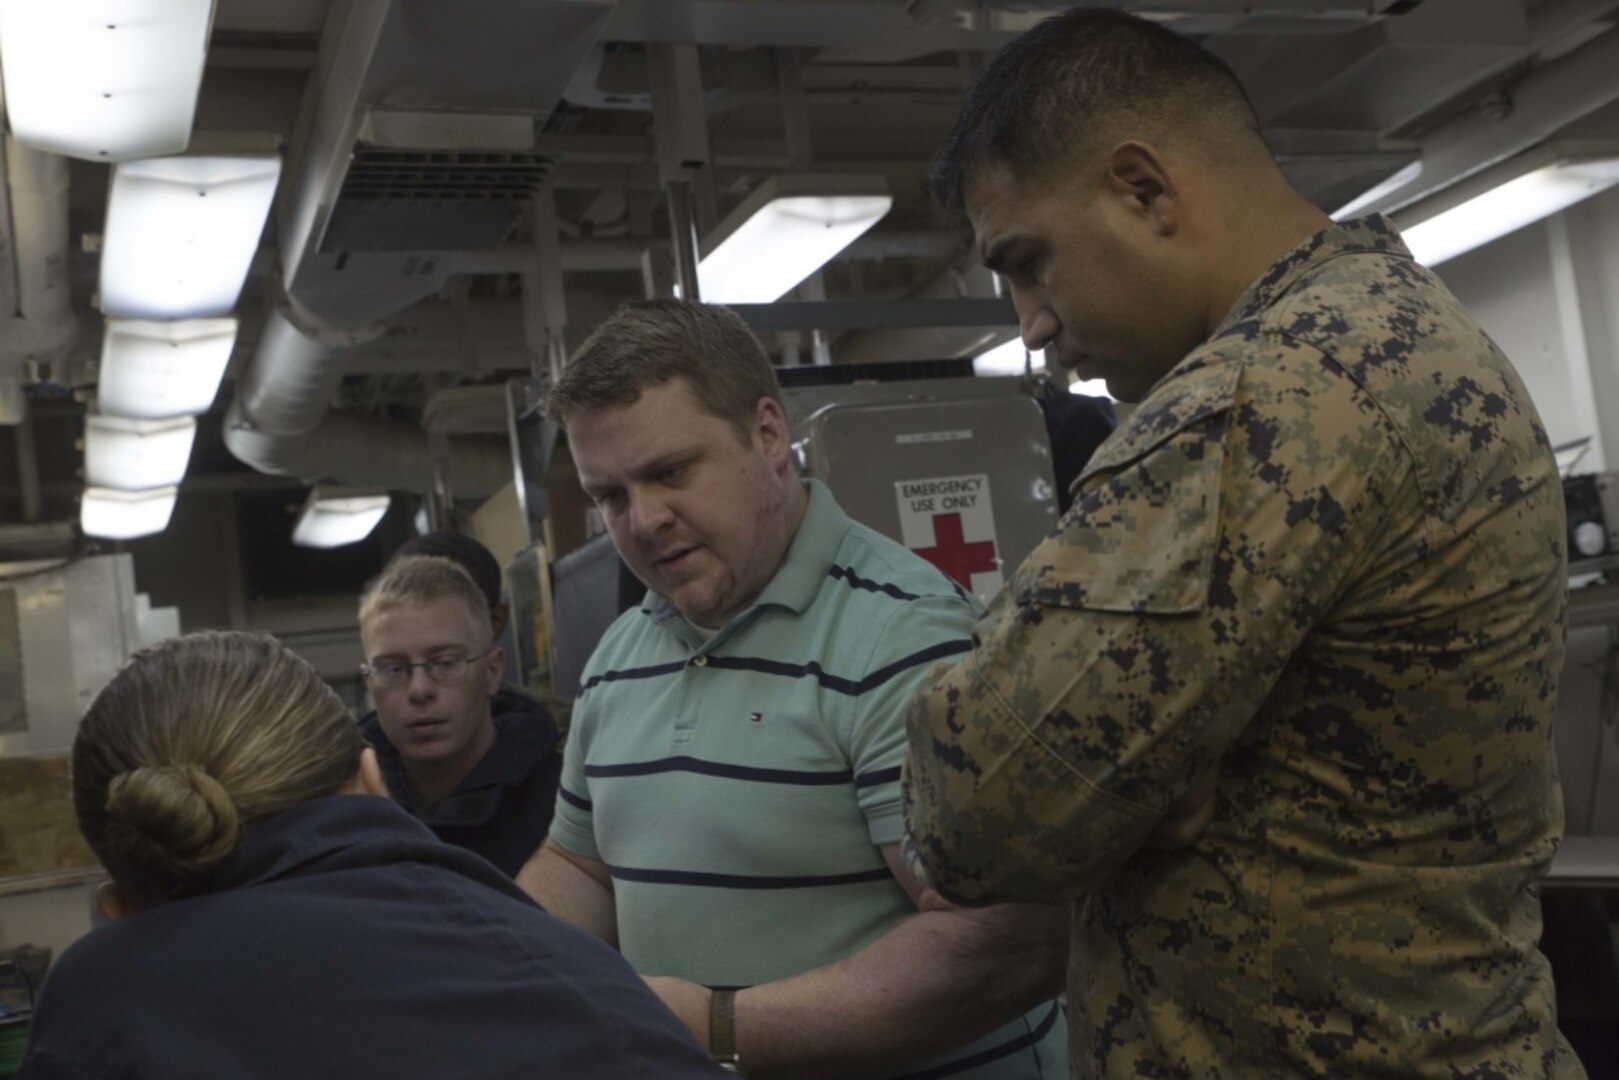 Sam Pratt, an engineer with Naval Sea Systems Command, discusses the capabilities of 3-D printing with service members aboard the USS Wasp (LHD-1) while underway in the Pacific Ocean, April 7, 2018. Marines with Combat Logistics Battalion 31, 31st Marine Expeditionary Unit, are now capable of ~additive manufacturing, also known as 3-D printing, which is the technique of replicating digital 3-D models as tangible objects. The 31st MEU partners with the Navy's Amphibious Squadron 11 to form the Wasp Amphibious Ready Group, a cohesive blue-green team capable of accomplishing a variety of missions across the Indo-Pacific.